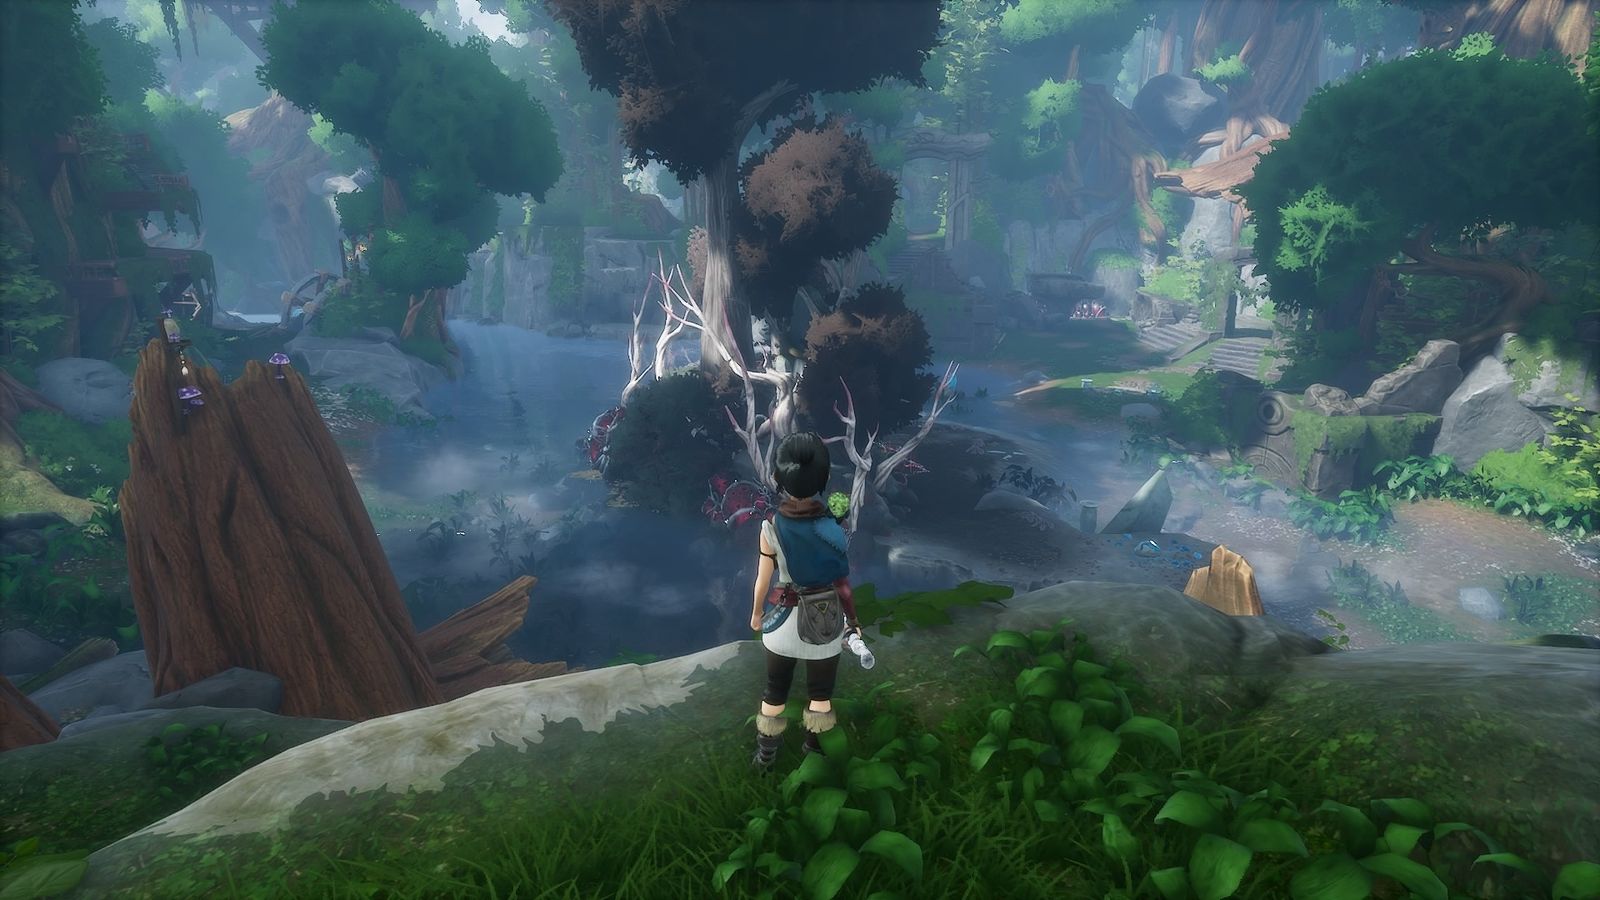 Kena looking at the infected trees that mark the location of the Water Shrine.